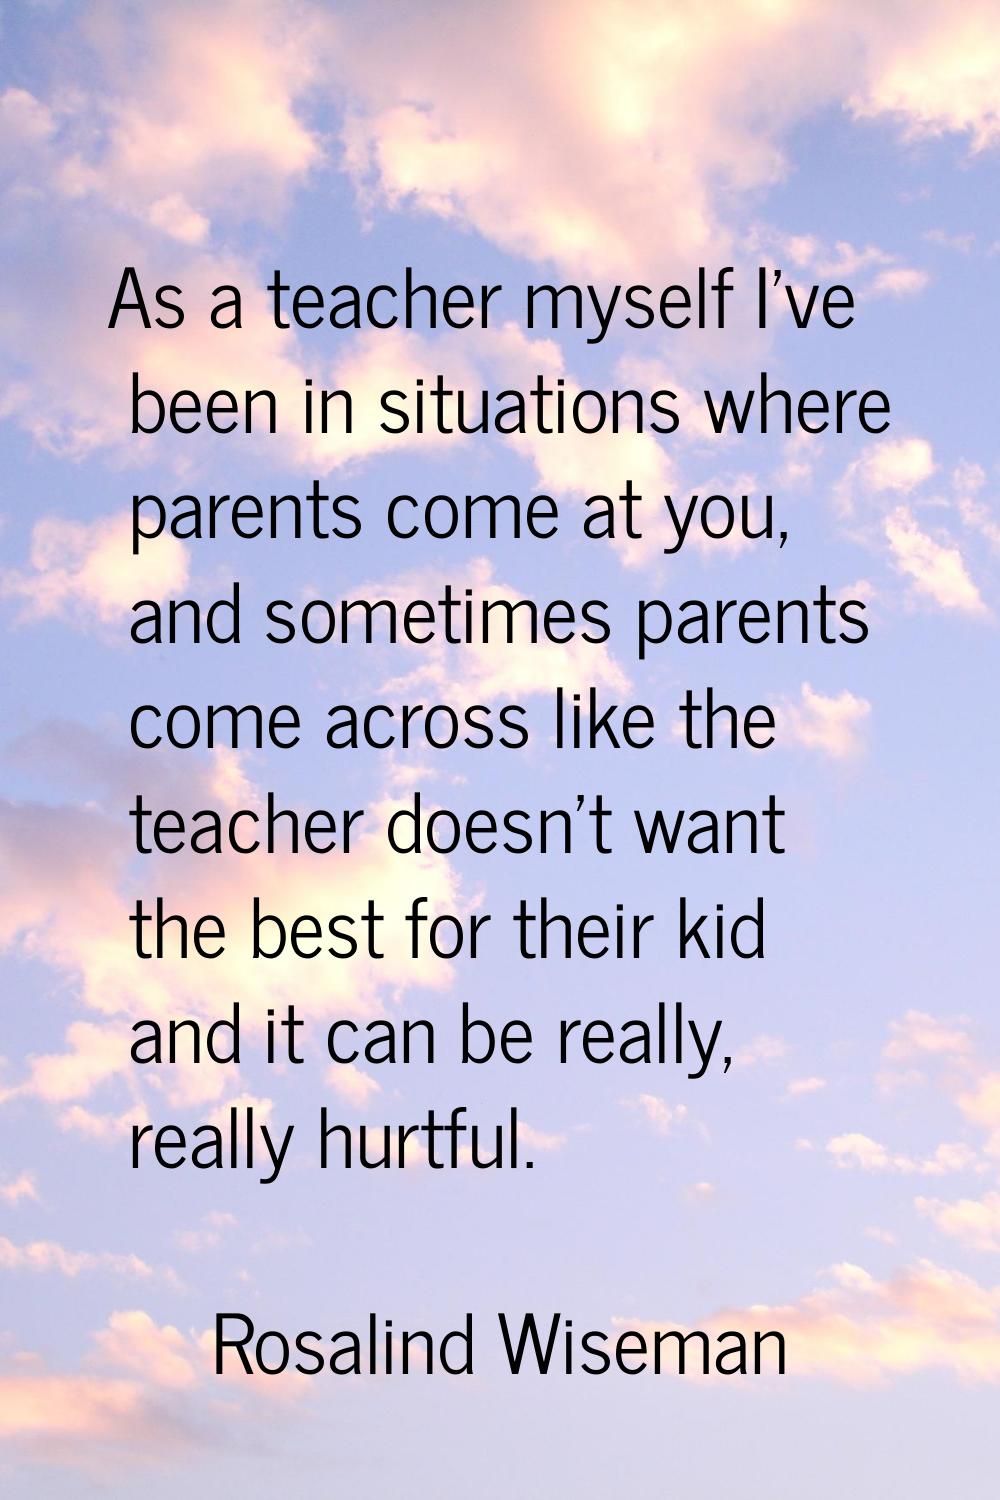 As a teacher myself I've been in situations where parents come at you, and sometimes parents come a